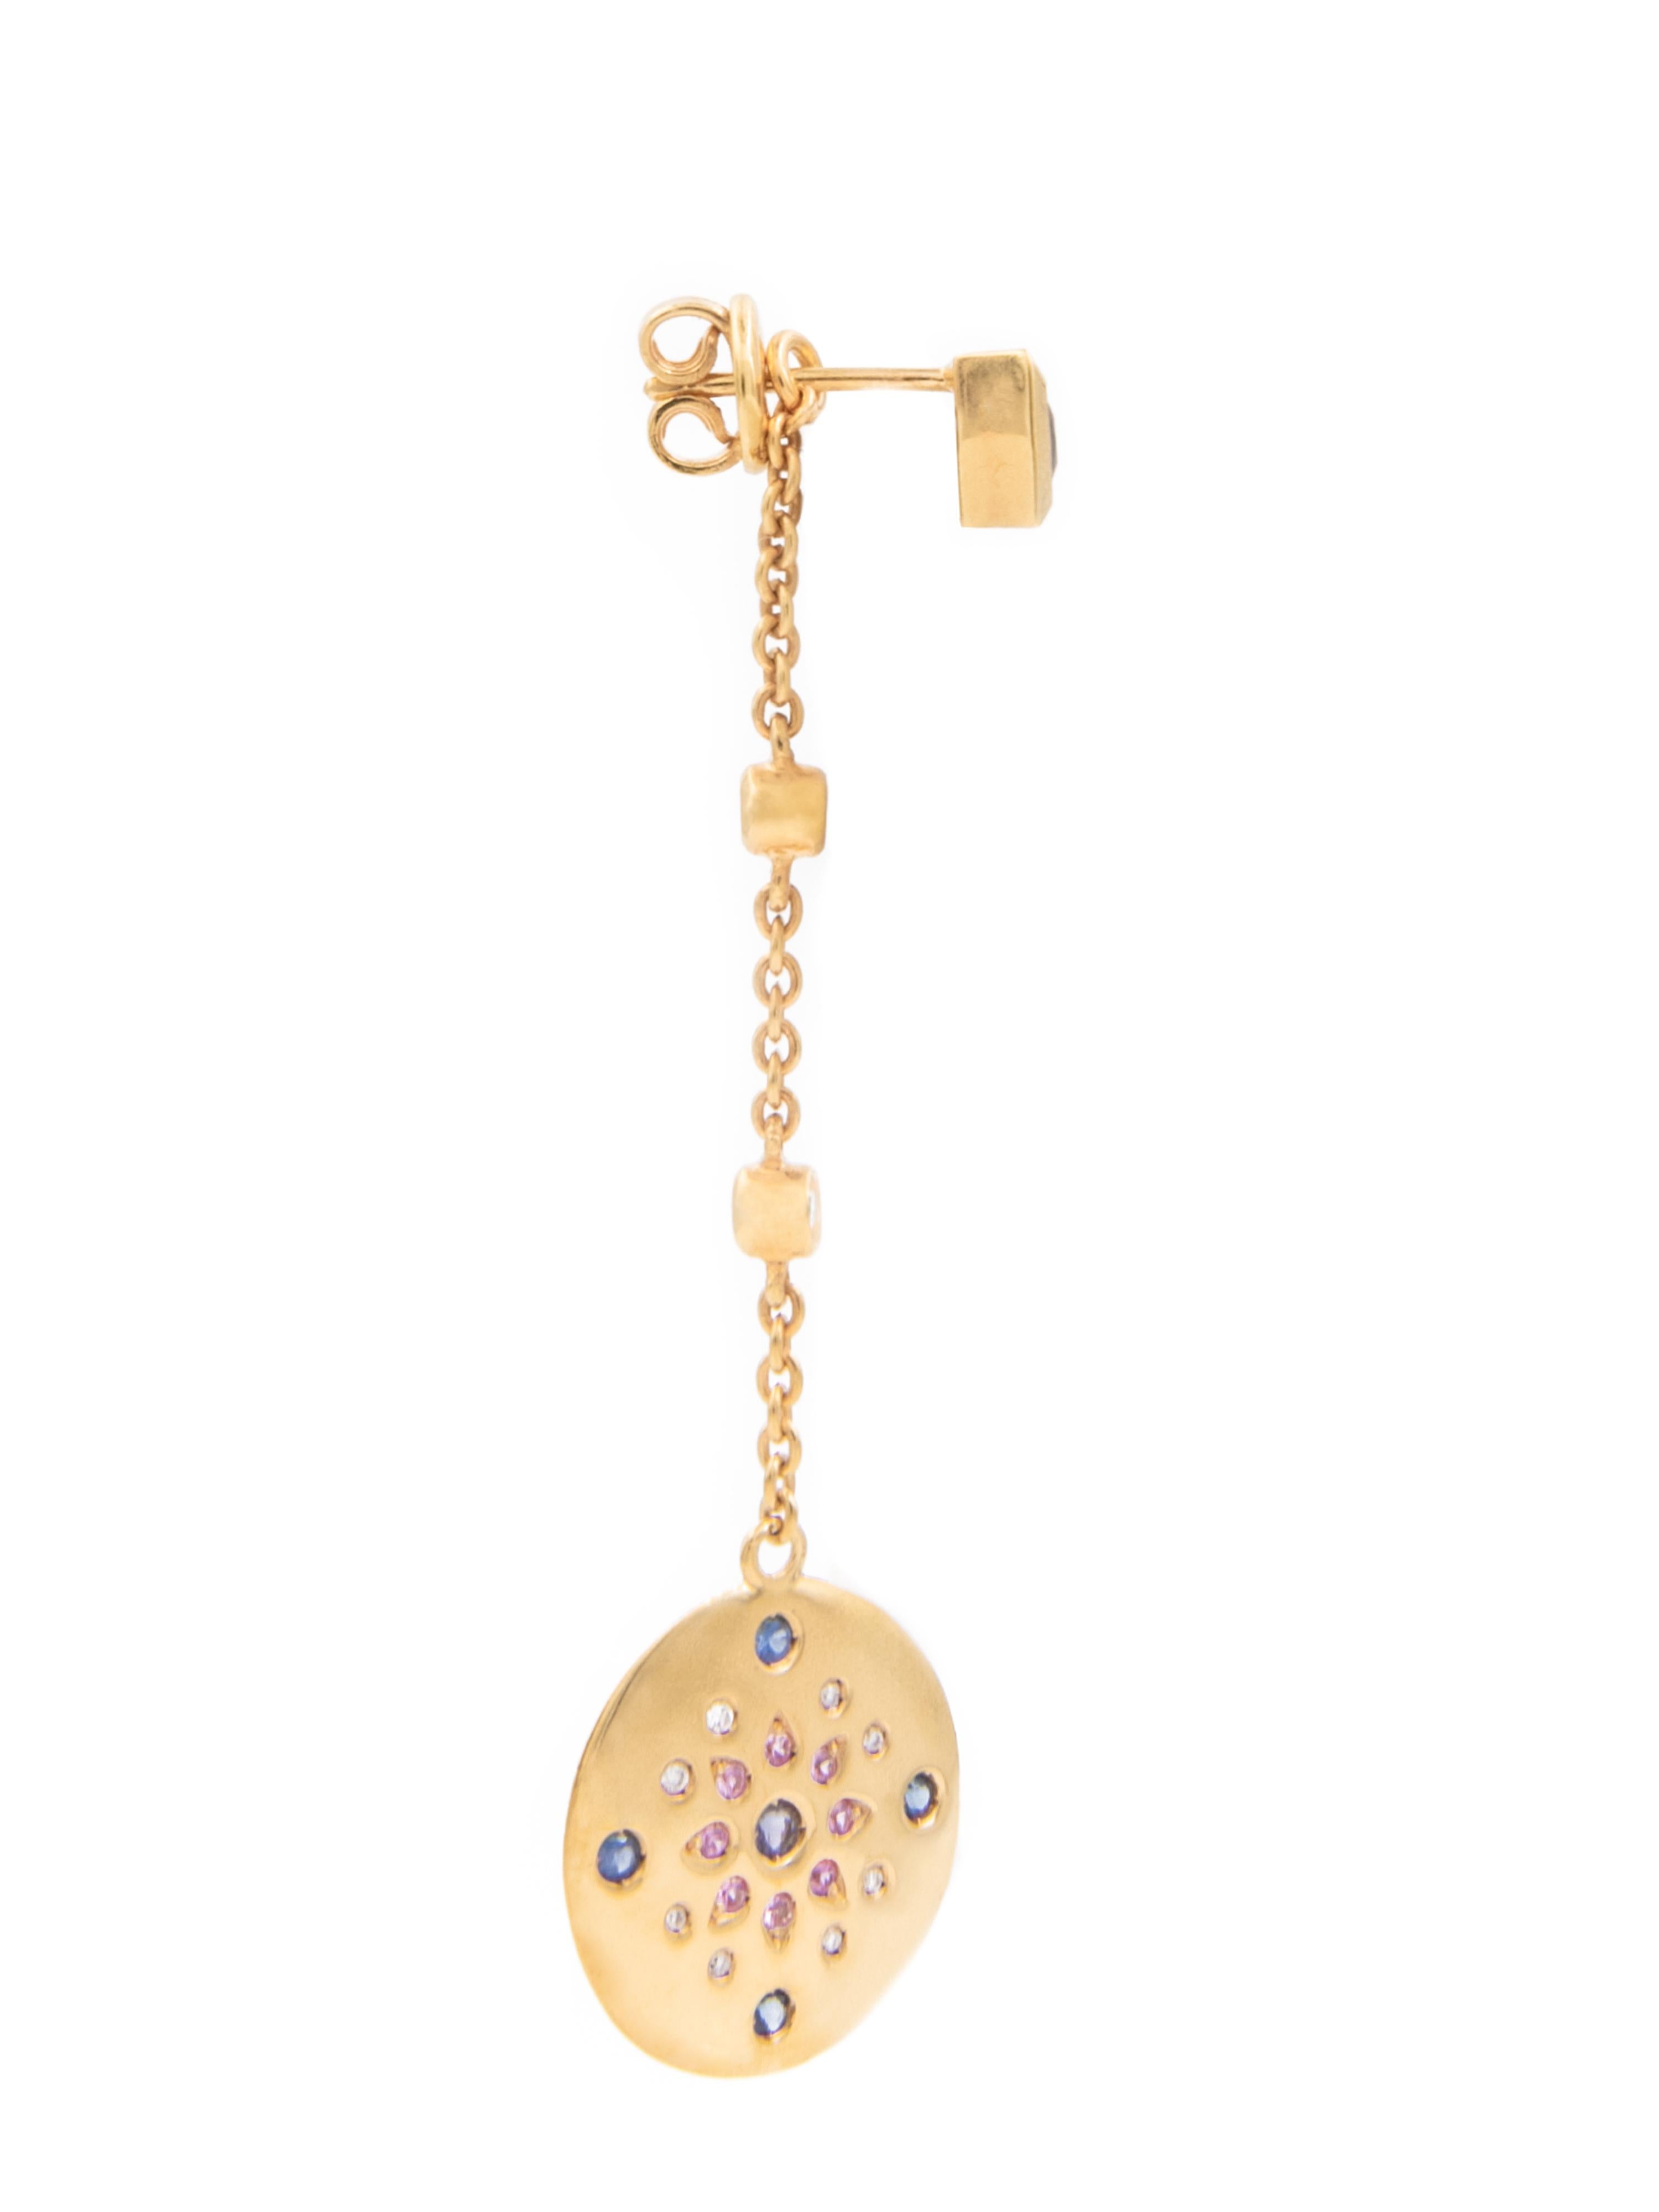 18 karat yellow gold pair of long dangle earrings with round disc pendants. The earrings are set with a total of 48 gemstones including a central iolite, 0,32-carat of blue and pink sapphires and 0,34-carat of diamonds. The square iolite studs on